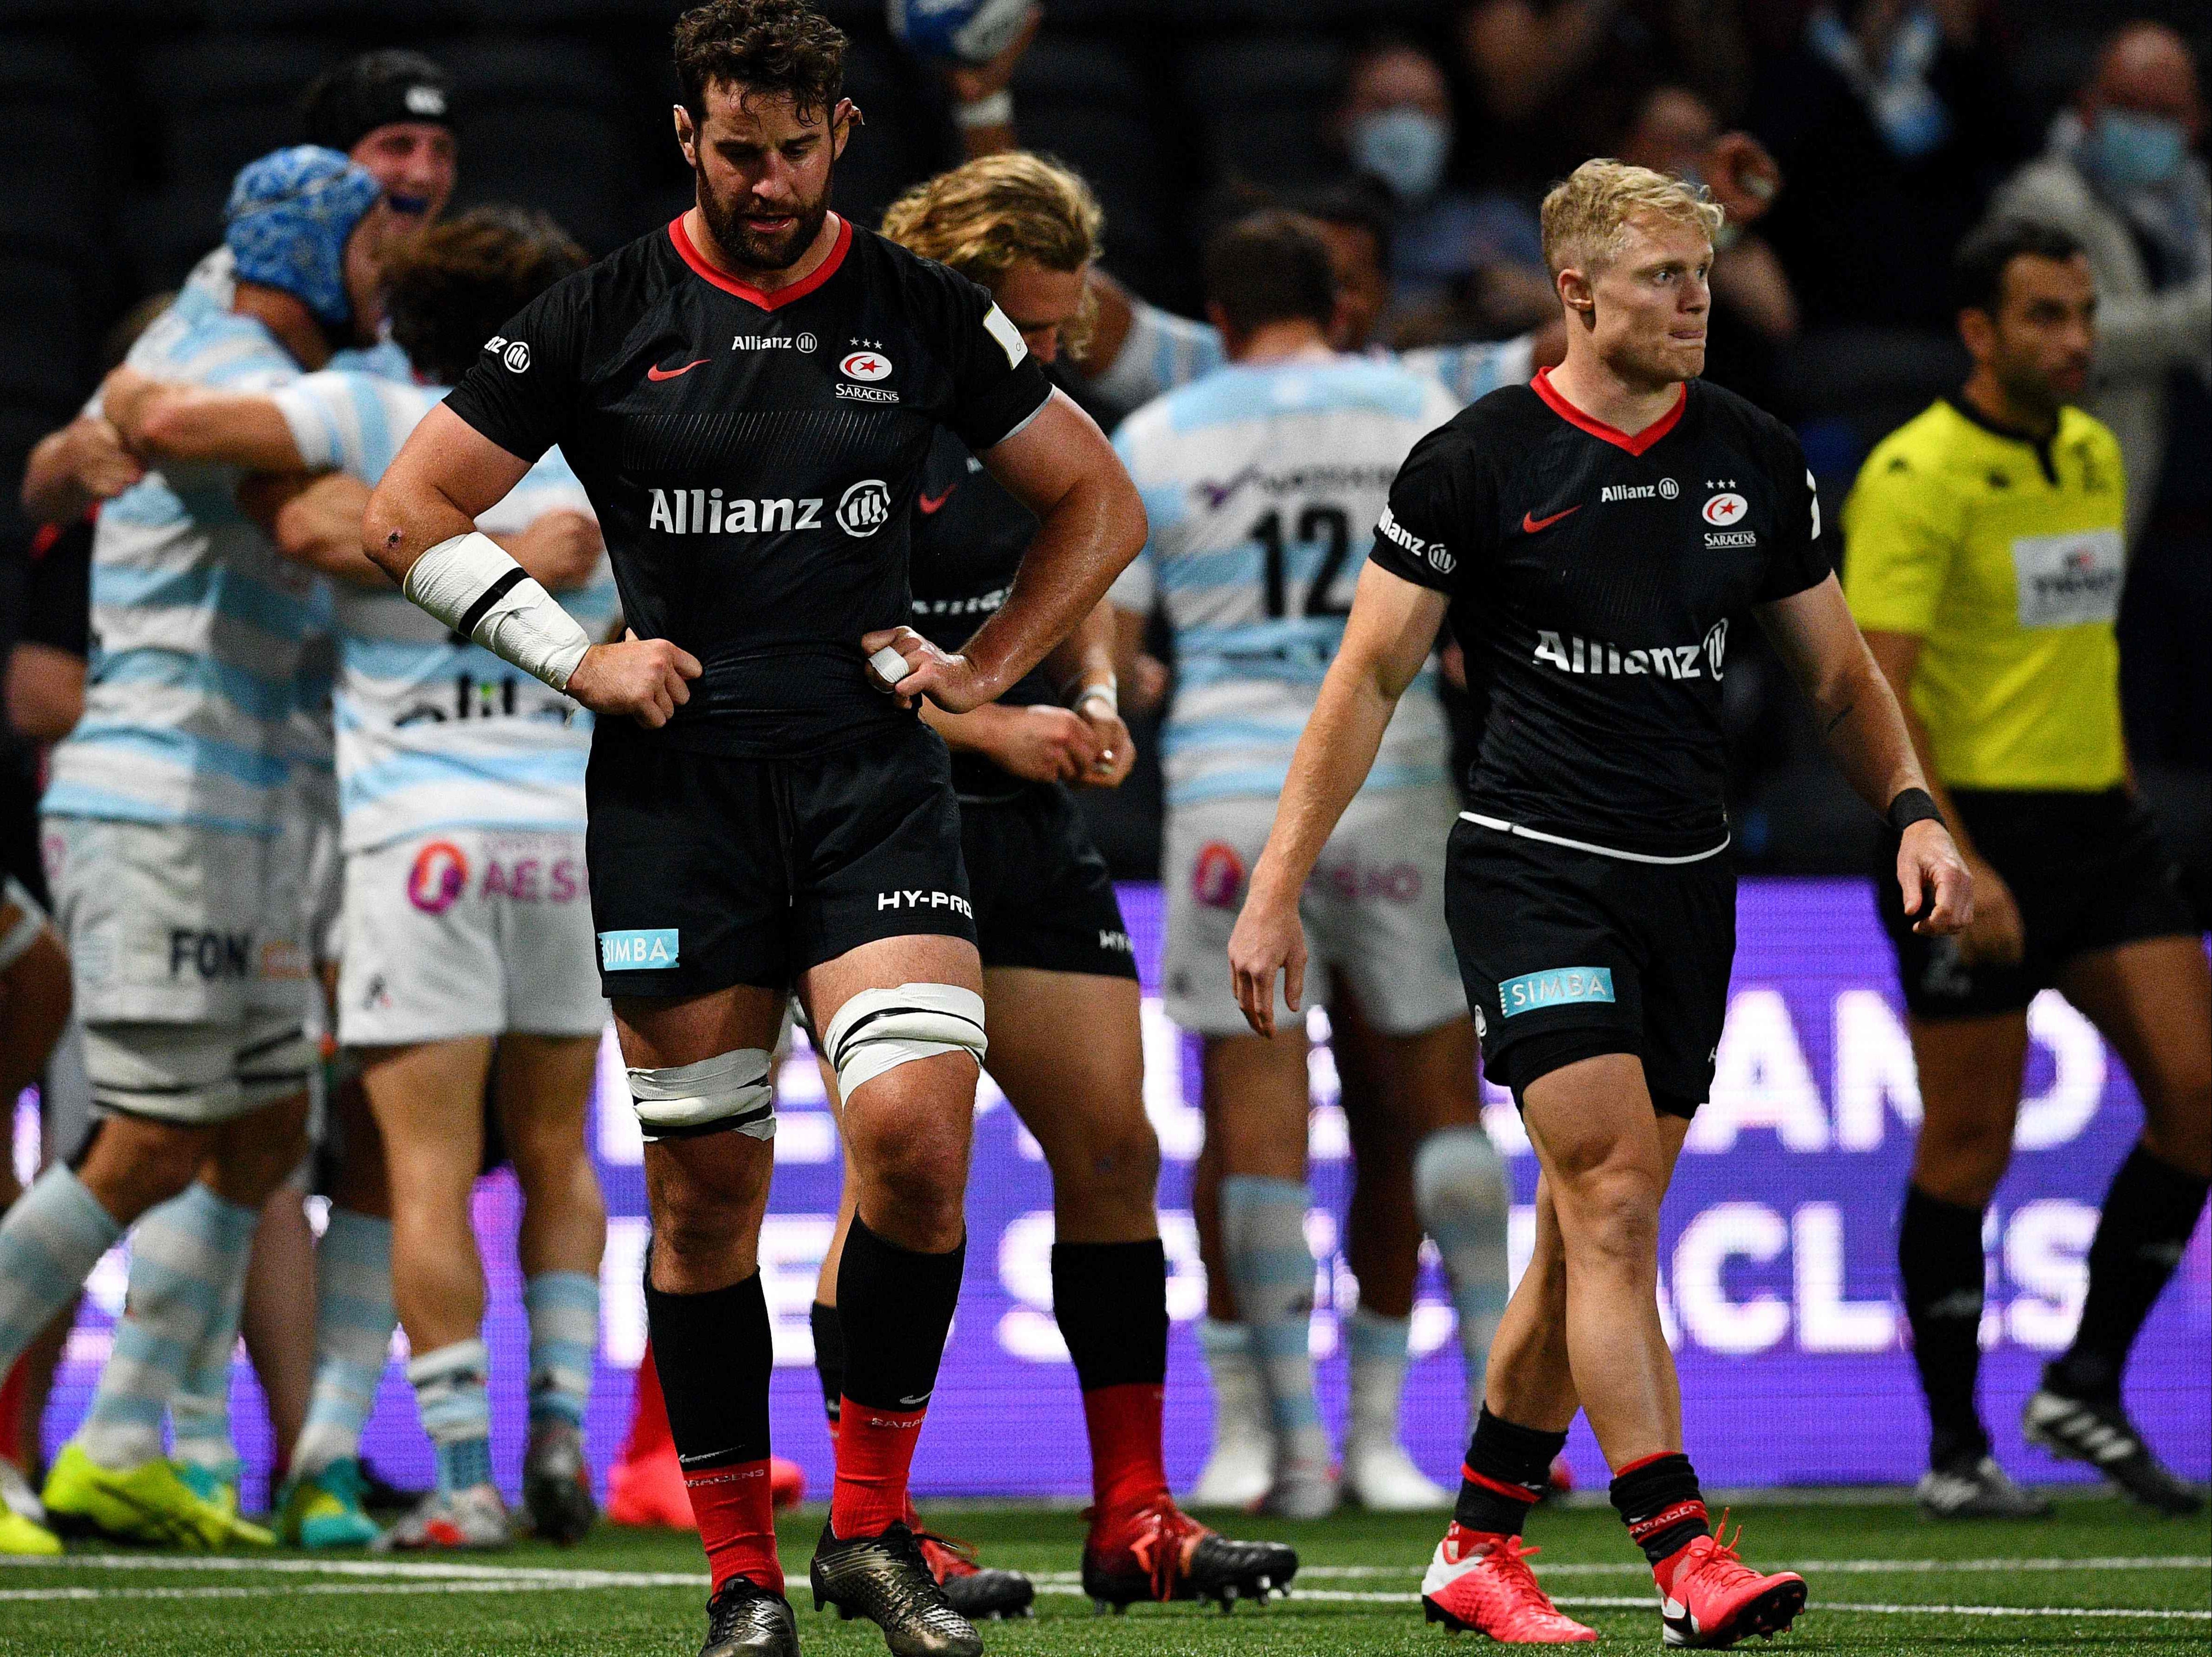 It was a disappointing day for Saracens